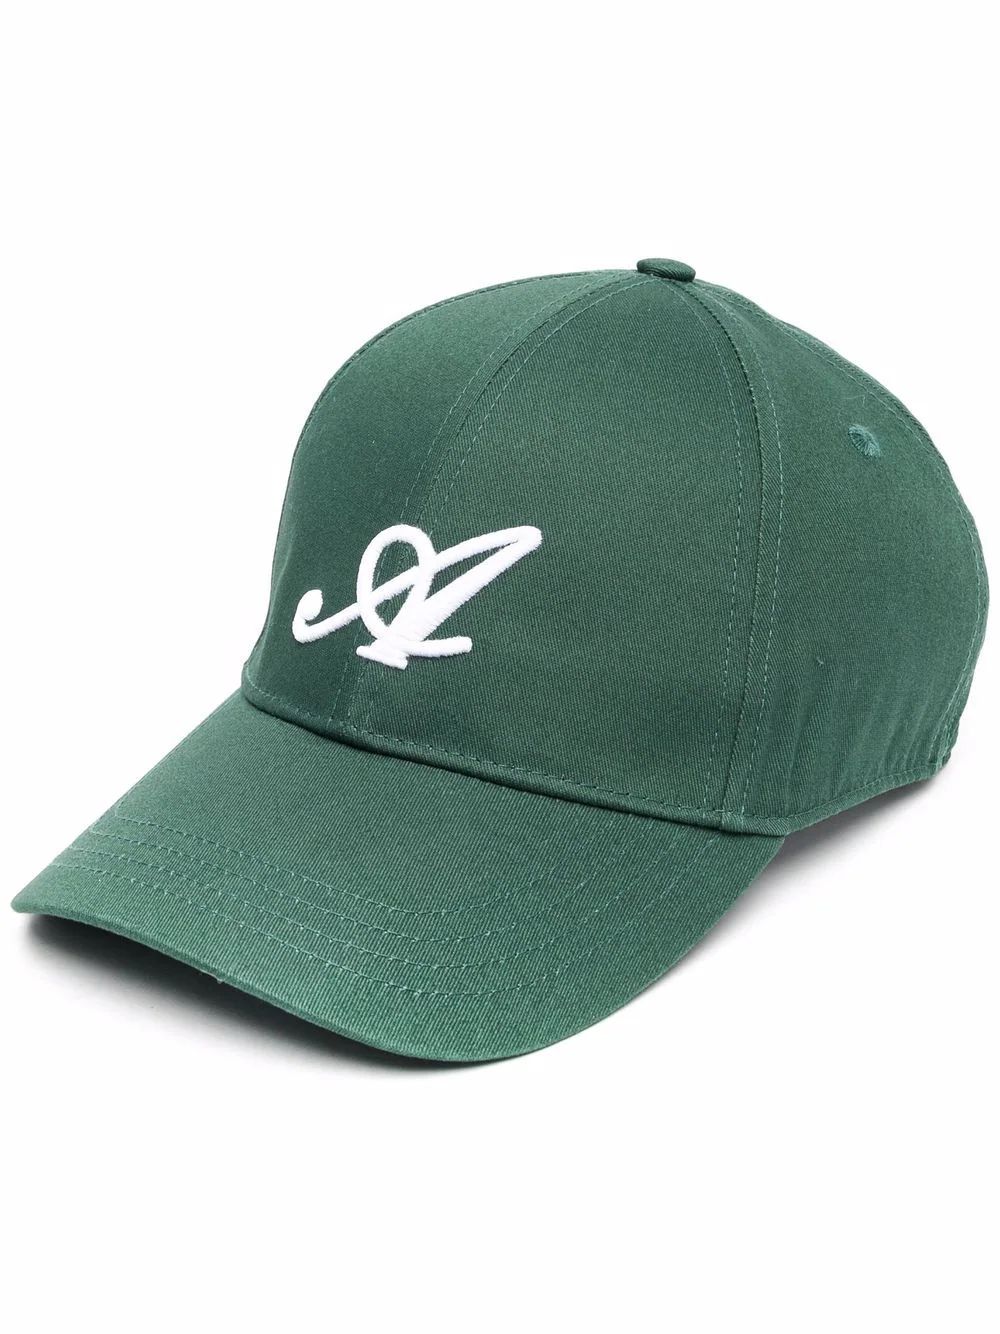 embroidered logo cap | Farfetch Global